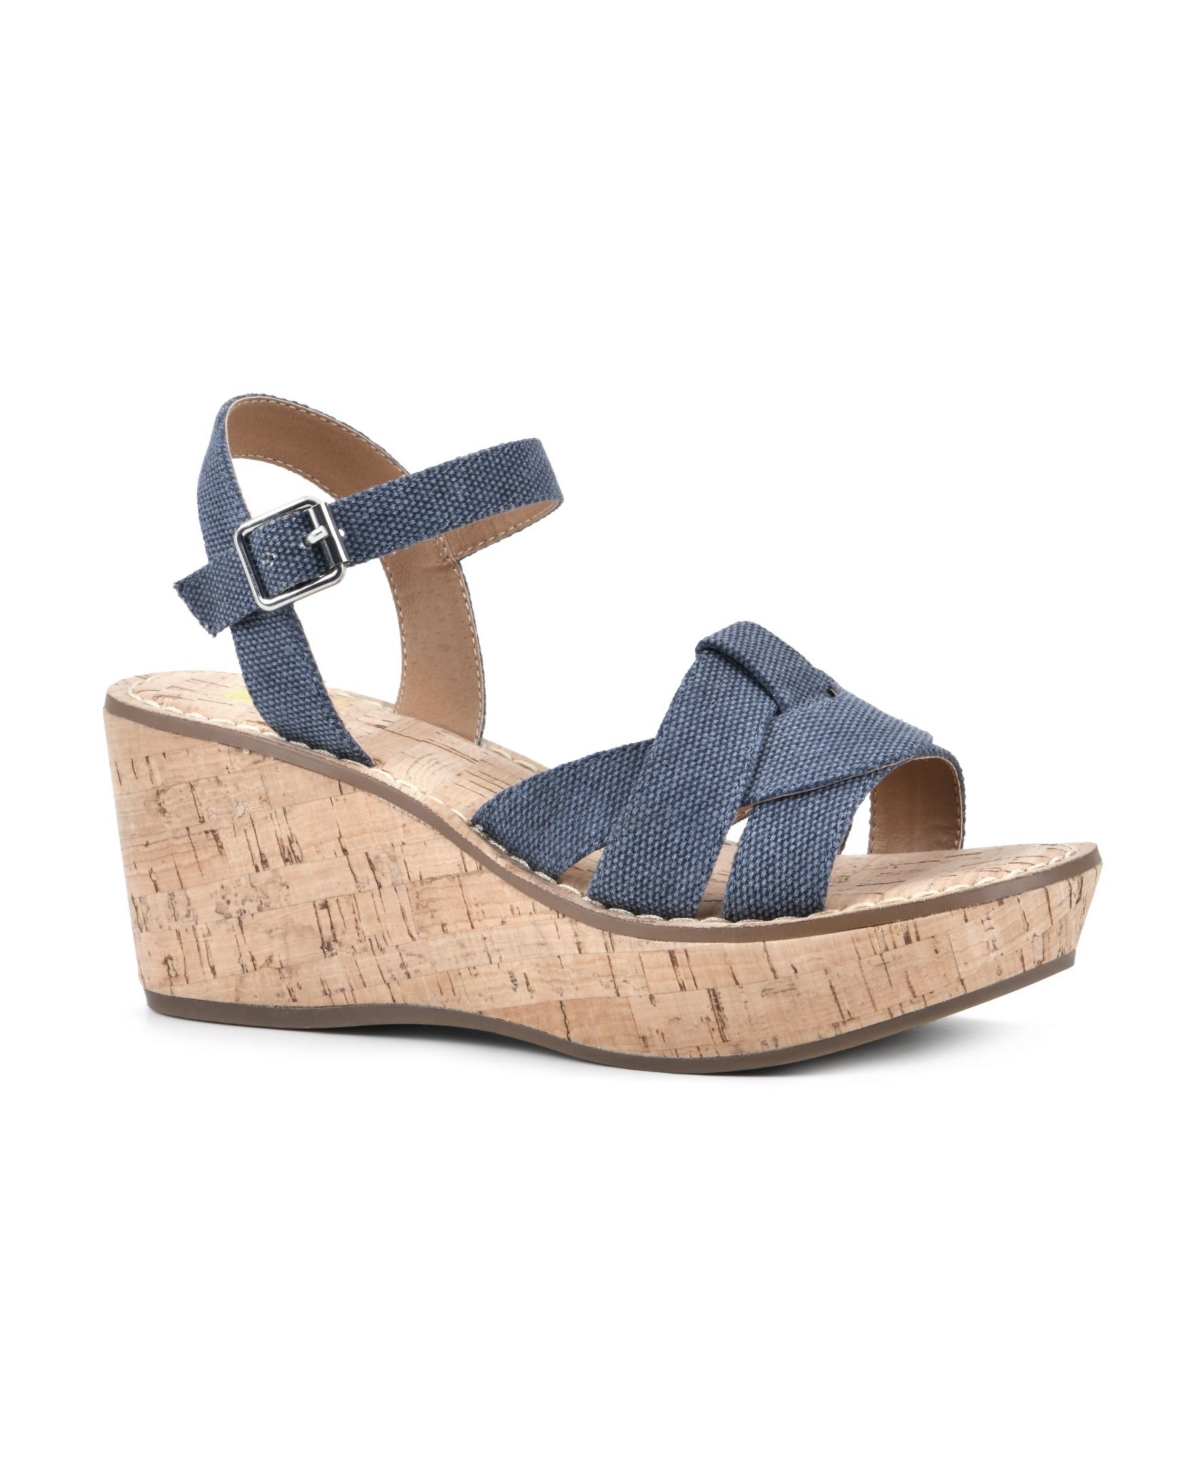 WHITE MOUNTAIN WOMEN'S SIMPLE WEDGE SANDALS WOMEN'S SHOES